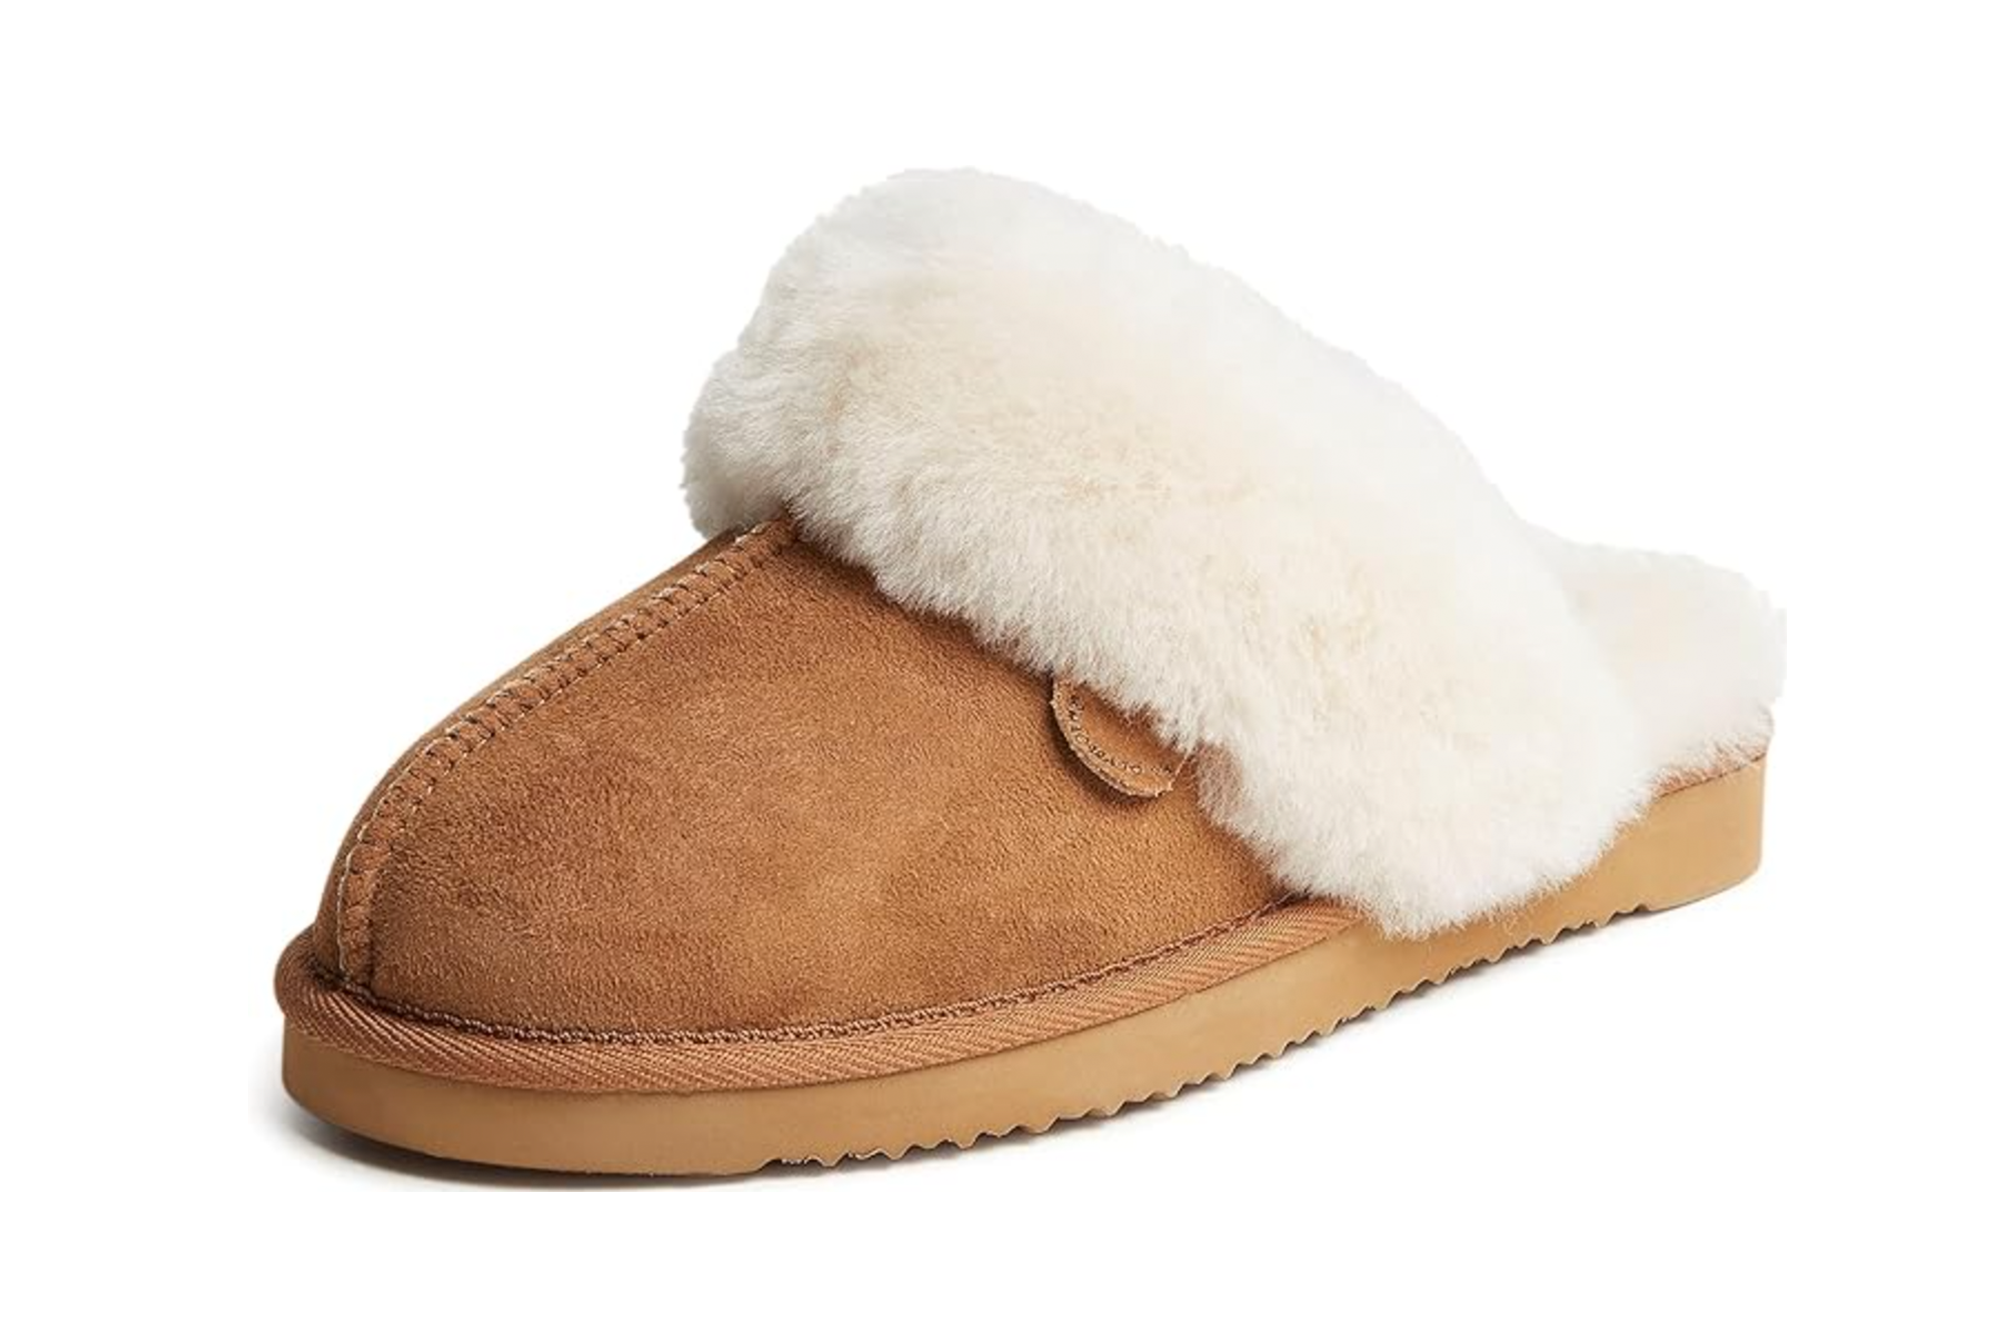 Nannen outdoor slippers, SUBU, Night Botanical 37-38 | products \ wise walk  brands \ Subu products \ view all